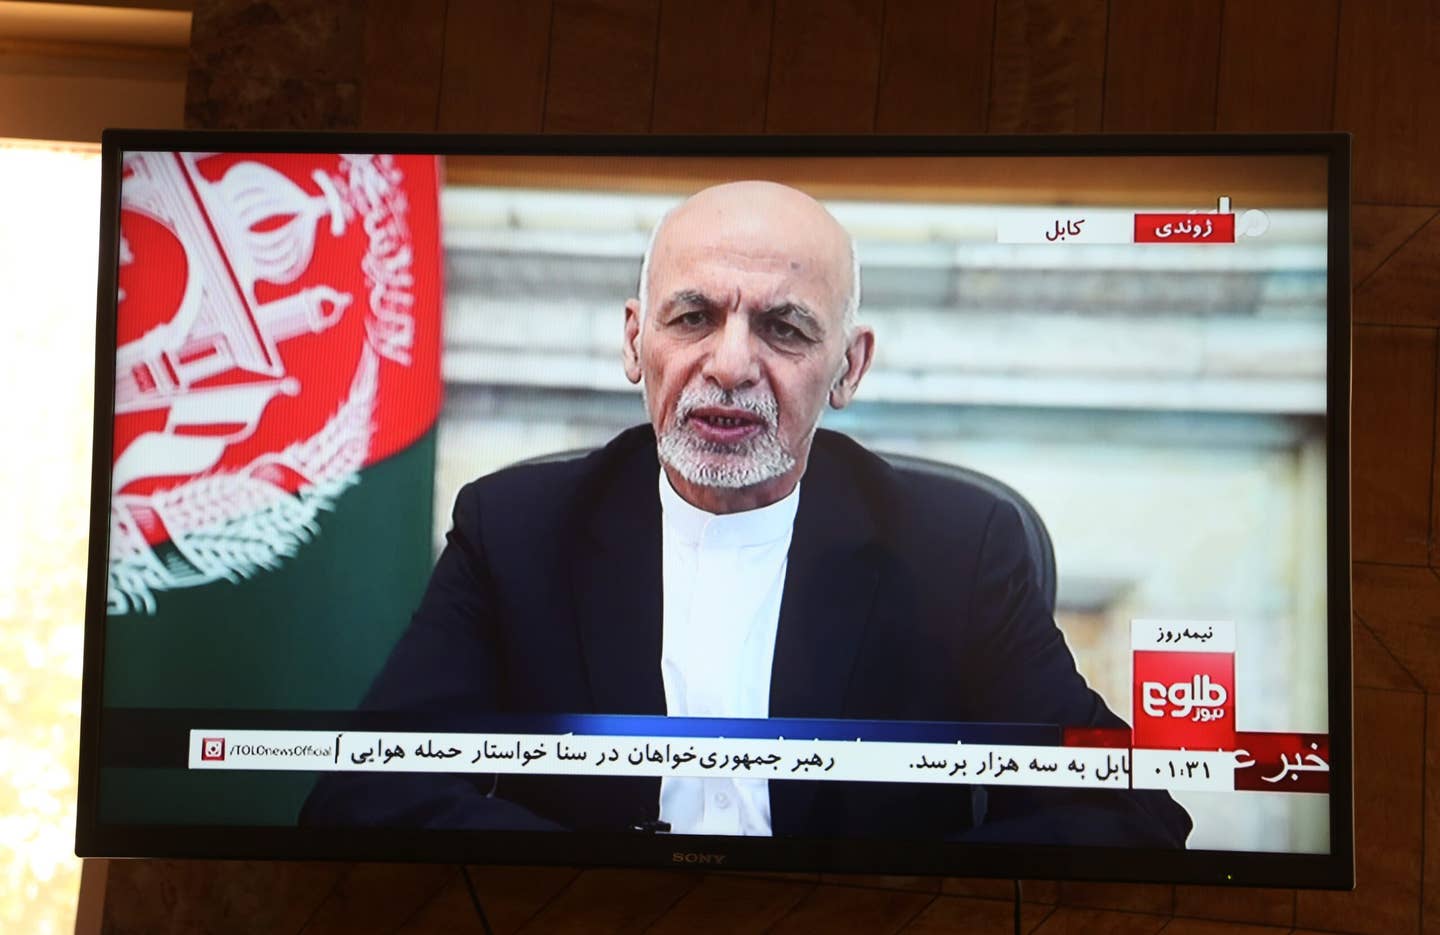 Afghan President Mohammad Ashraf Ghani speaks in a televised address in Kabul, capital of Afghanistan, Aug. 14, 2021. President Ghani on Saturday vowed to prevent instability in his war-battered country amid the intensified fighting and the Taliban's advance toward major cities. (Photo by Rahmatullah Alizadah/Xinhua via Getty Images)